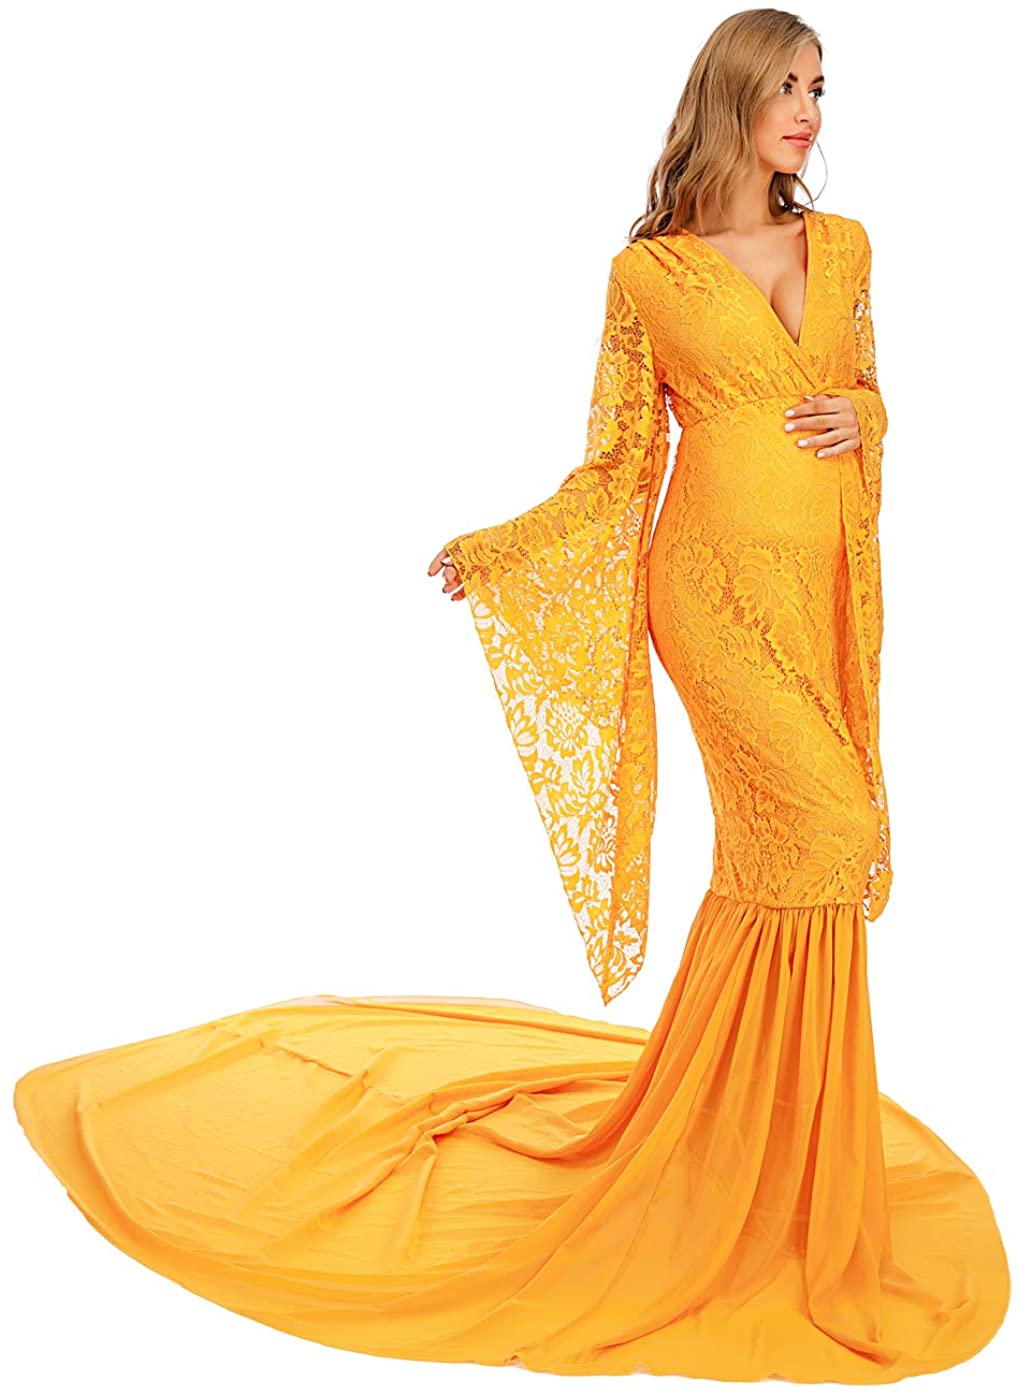 Deep V Neck Flared Sleeve with Long Chiffon Train Lace Dress Maternity Gown for Photography